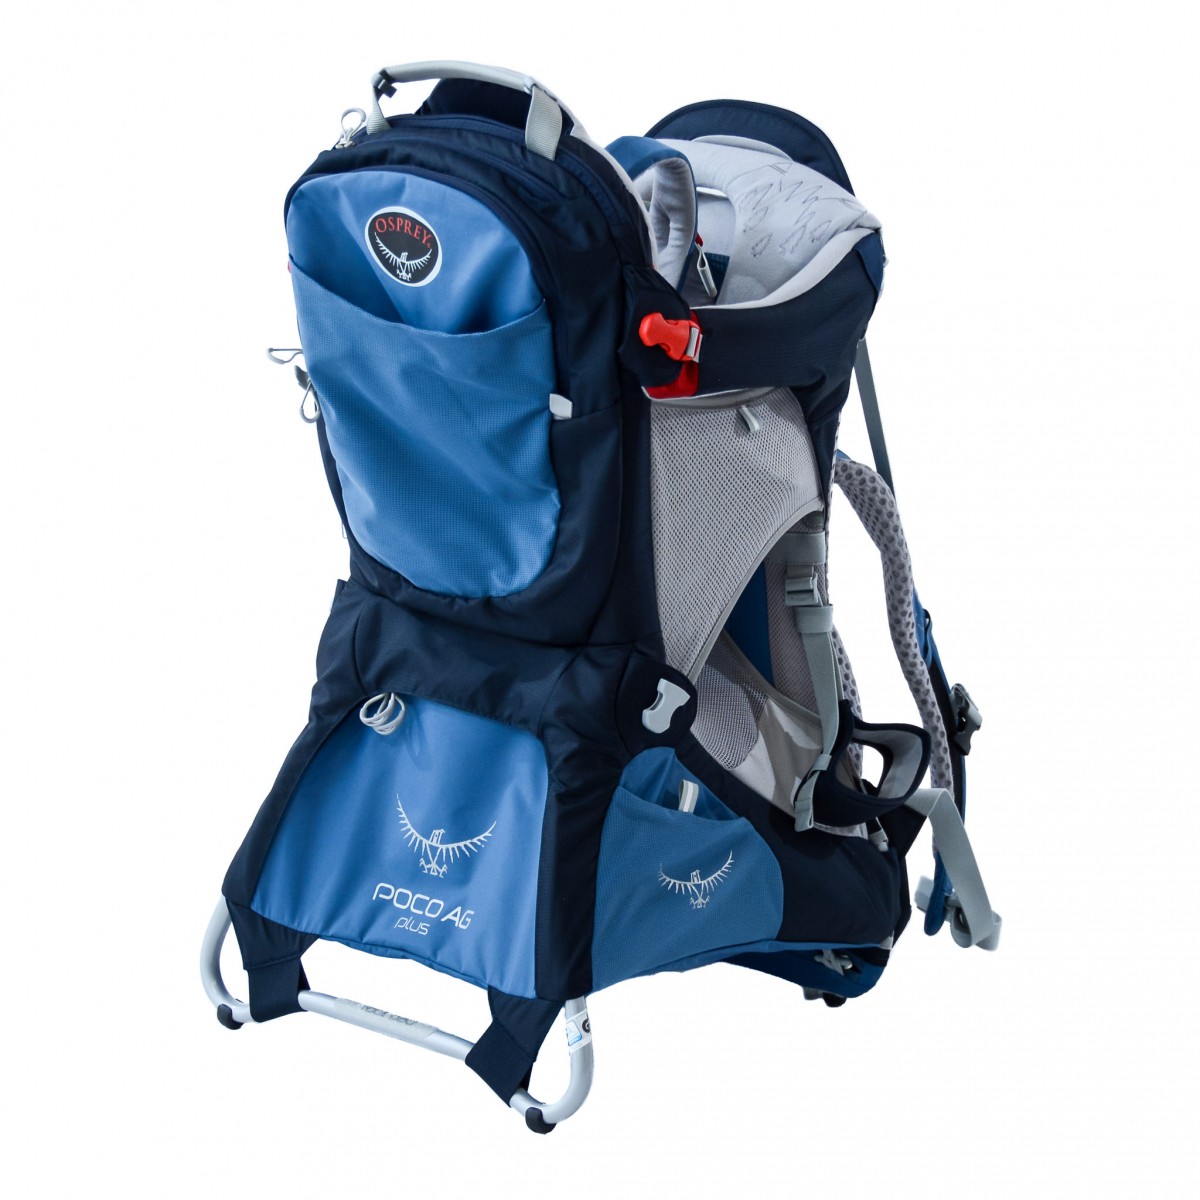 osprey poco plus baby backpack review